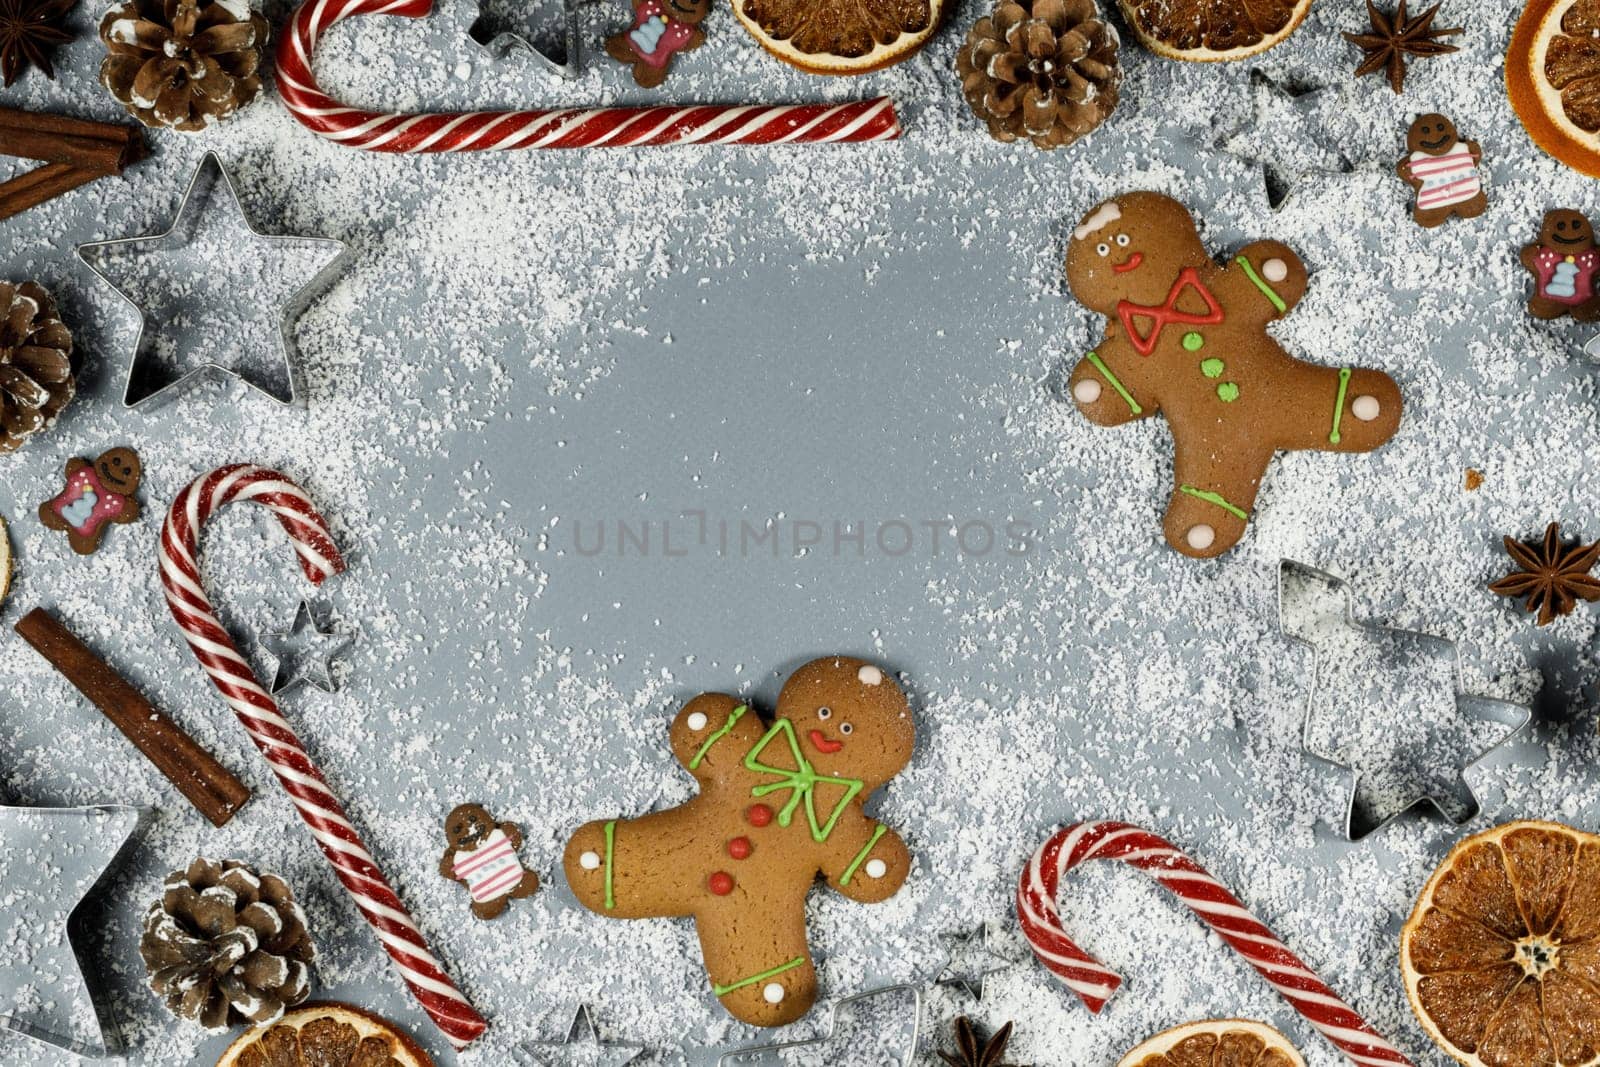 Christmas food gingerbread cookie caramel candy cane cinnamon mold shape anise orange slice on blue background with copy space